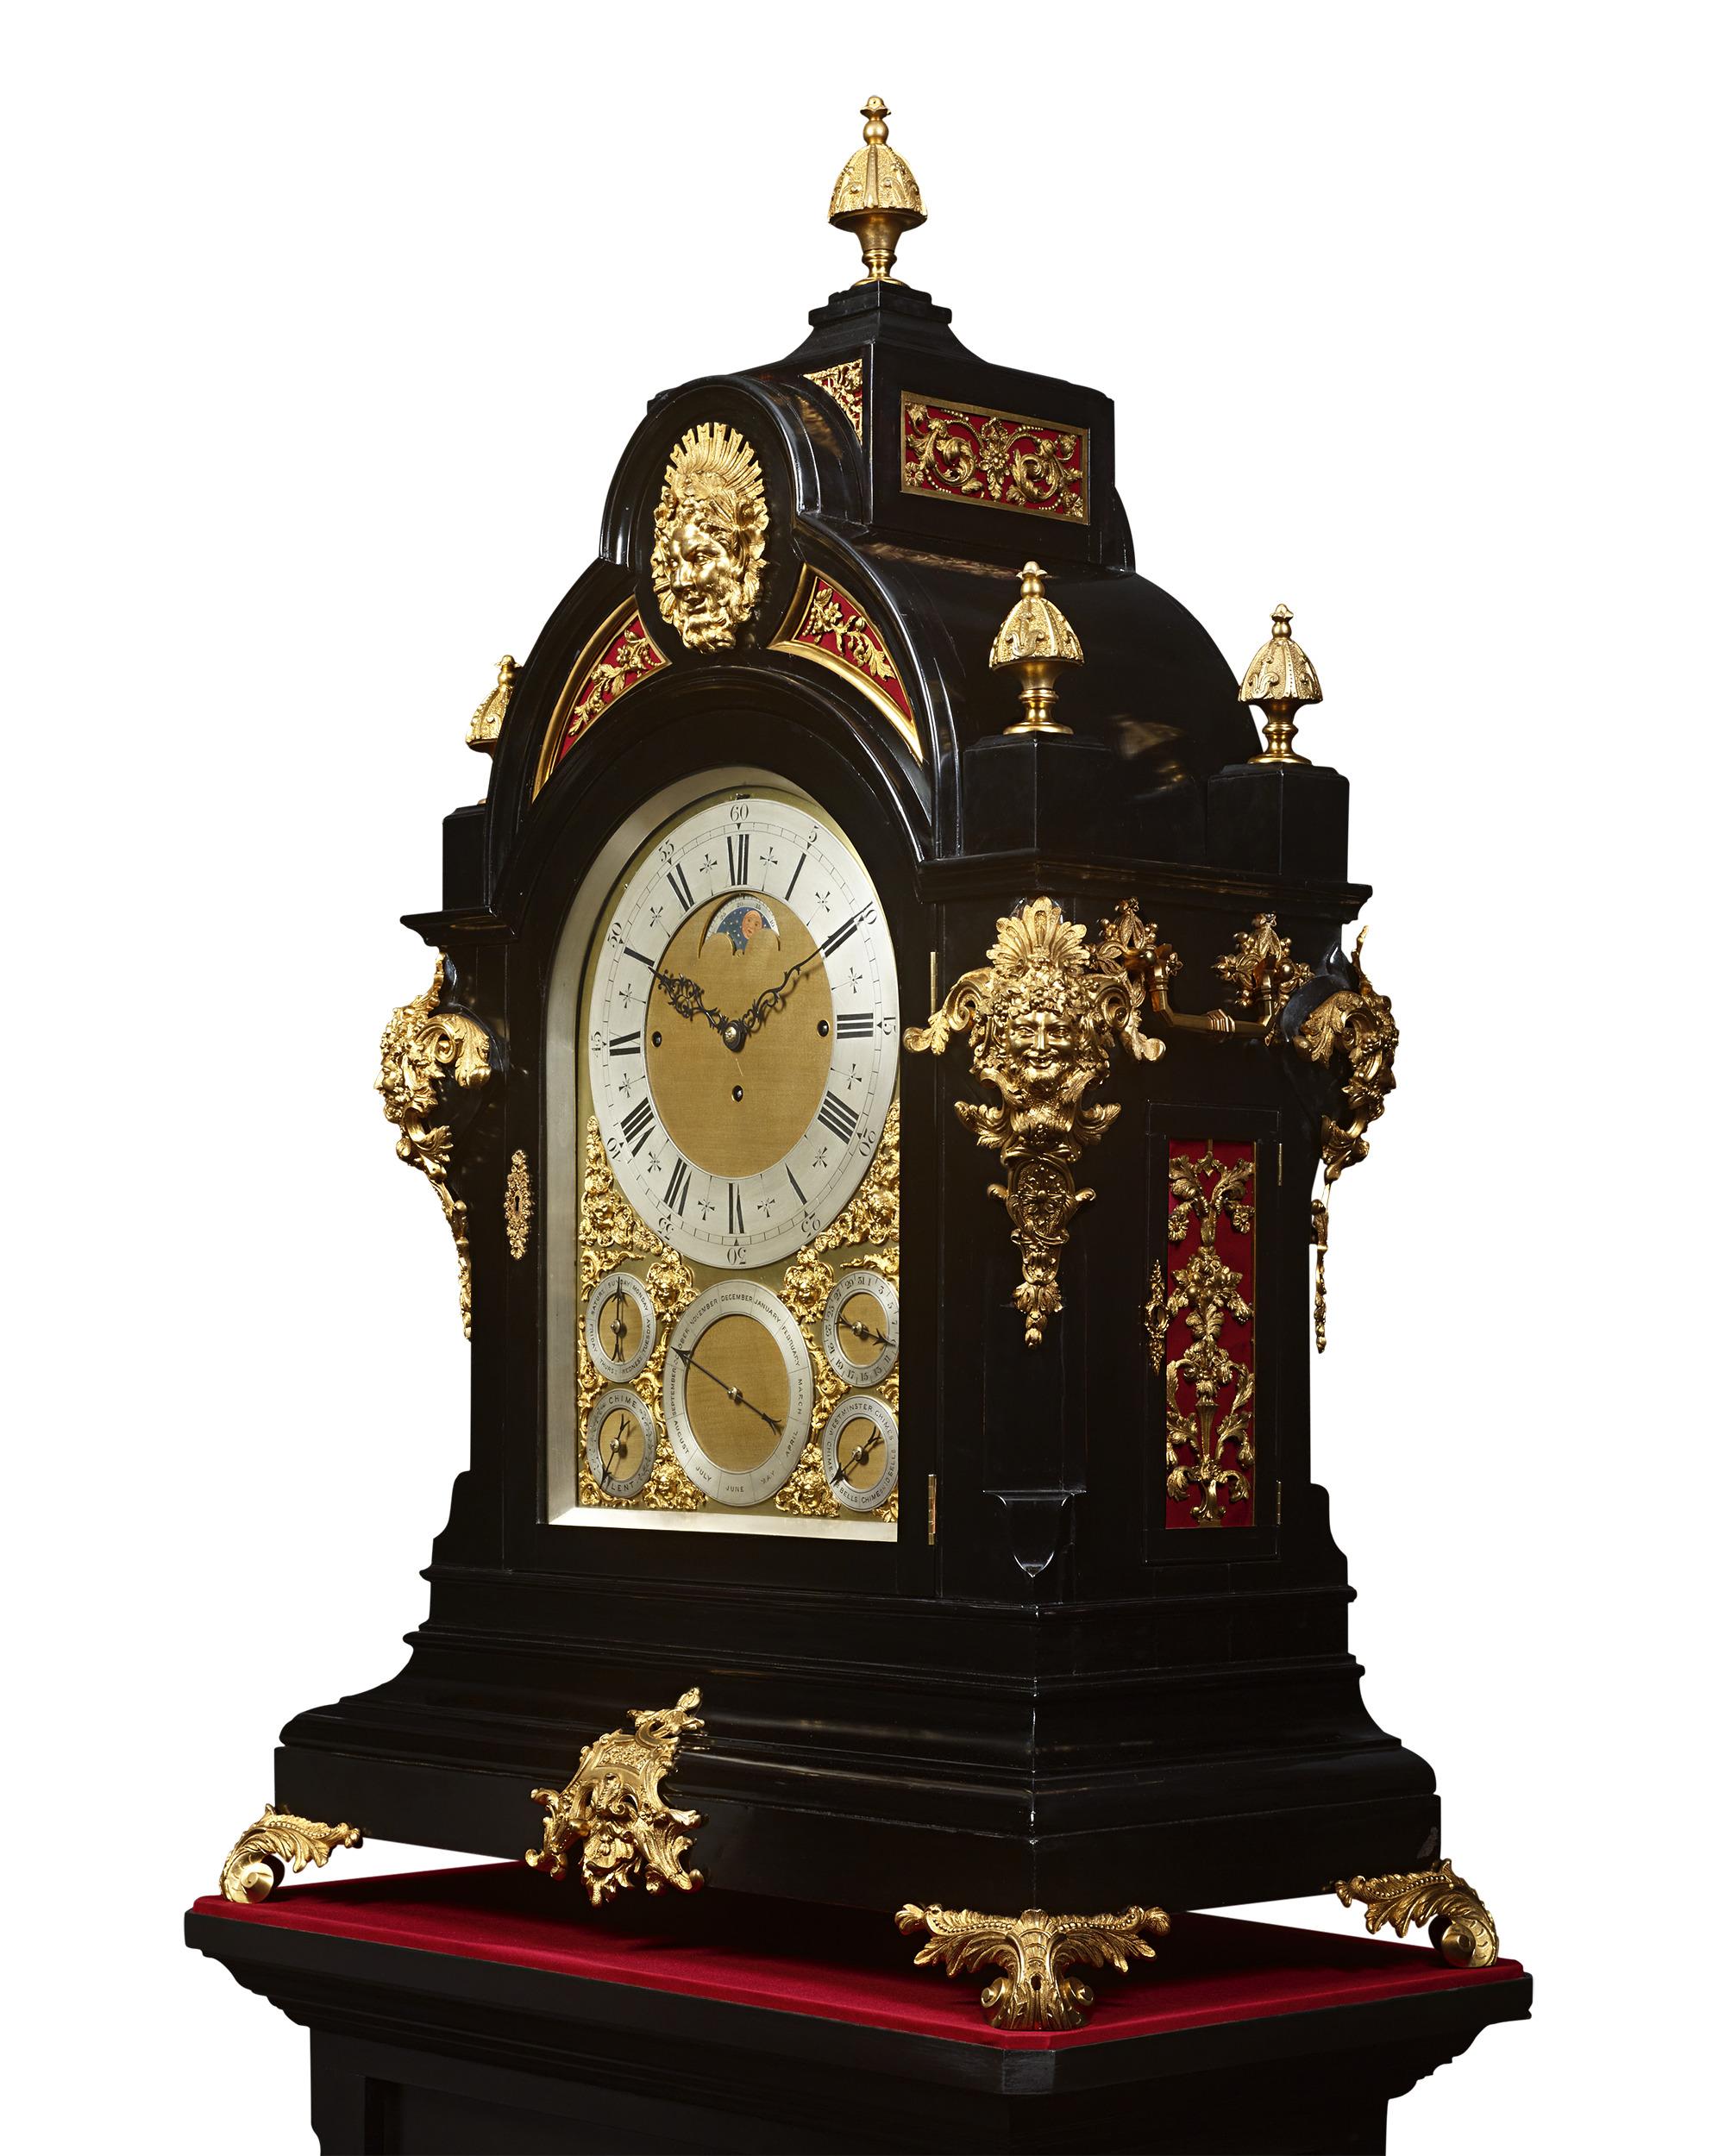 Monumental Three-Train Bracket Clock by J.C. Jennens & Sons In Excellent Condition For Sale In New Orleans, LA